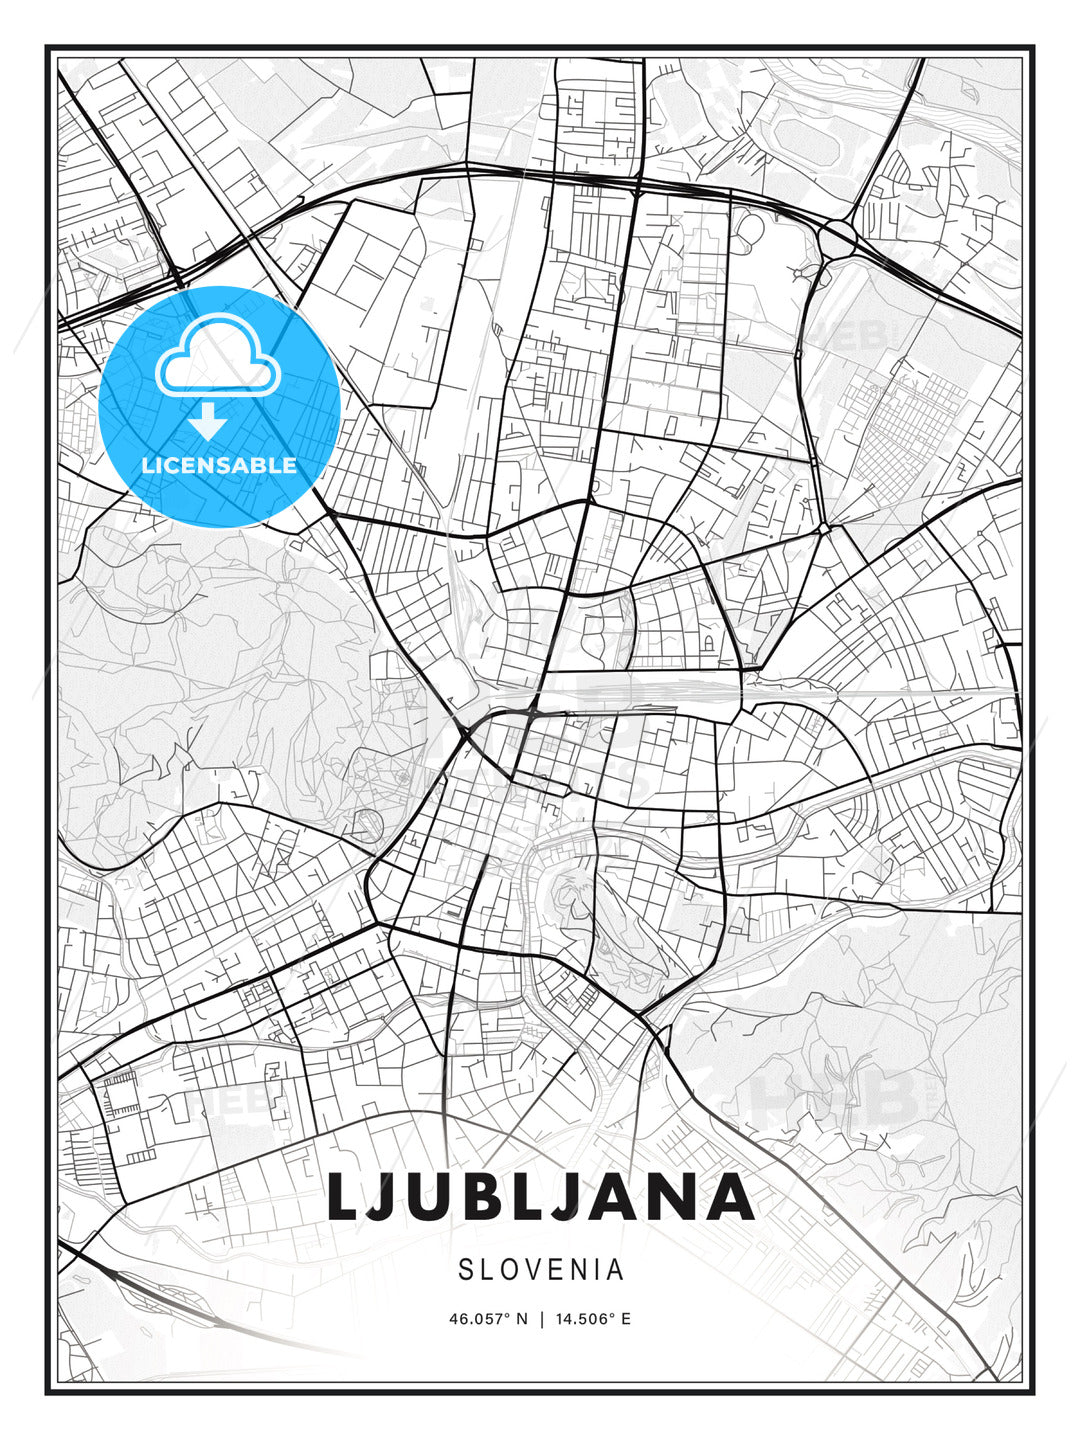 Ljubljana, Slovenia, Modern Print Template in Various Formats - HEBSTREITS Sketches